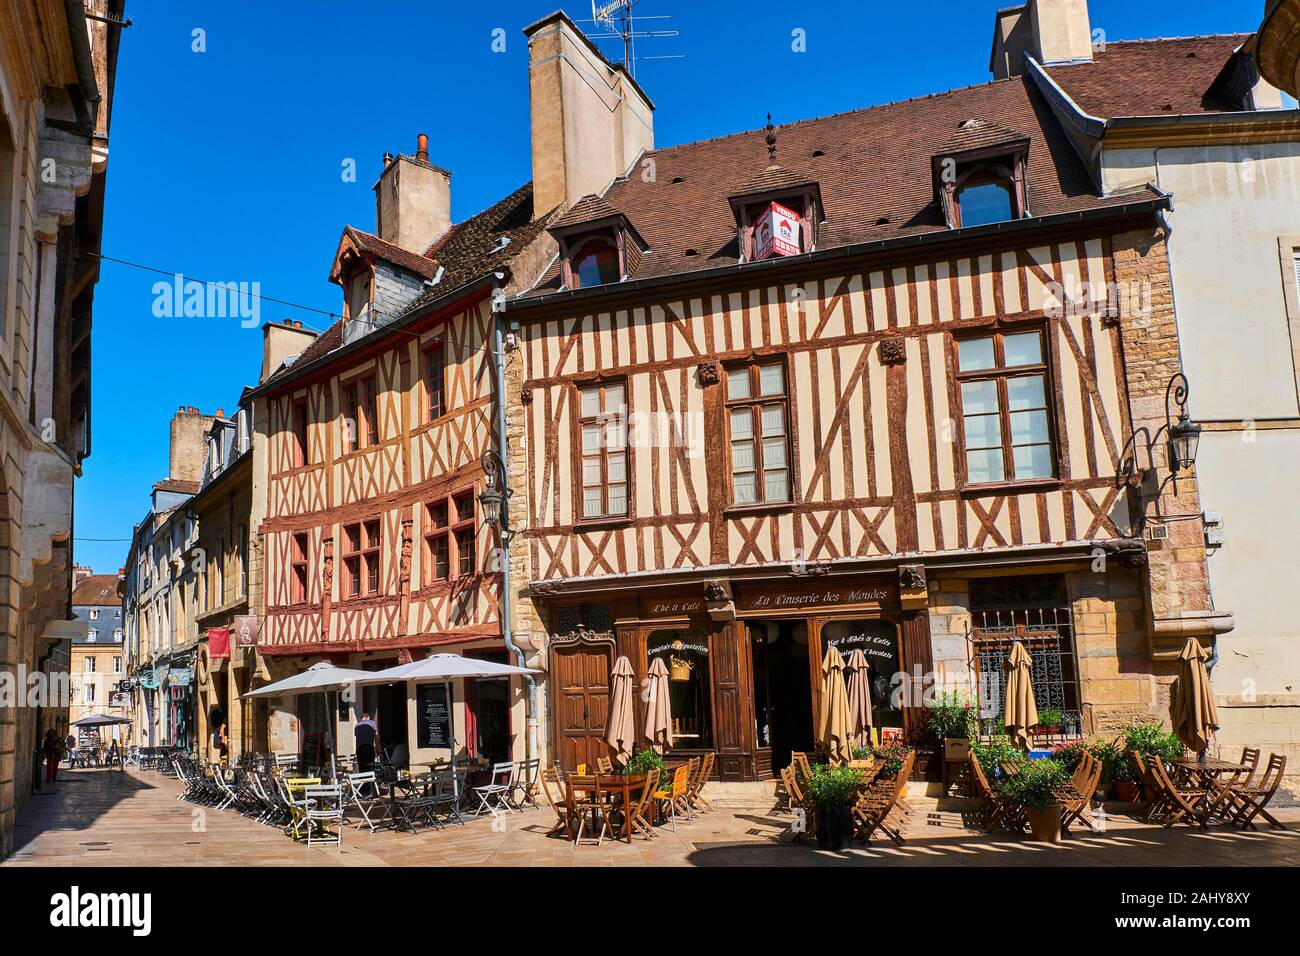 France, Burgundy, Côte-d'Or, Dijon, Unesco world heritage site, old houses on Amiral Roussin street Stock Photo